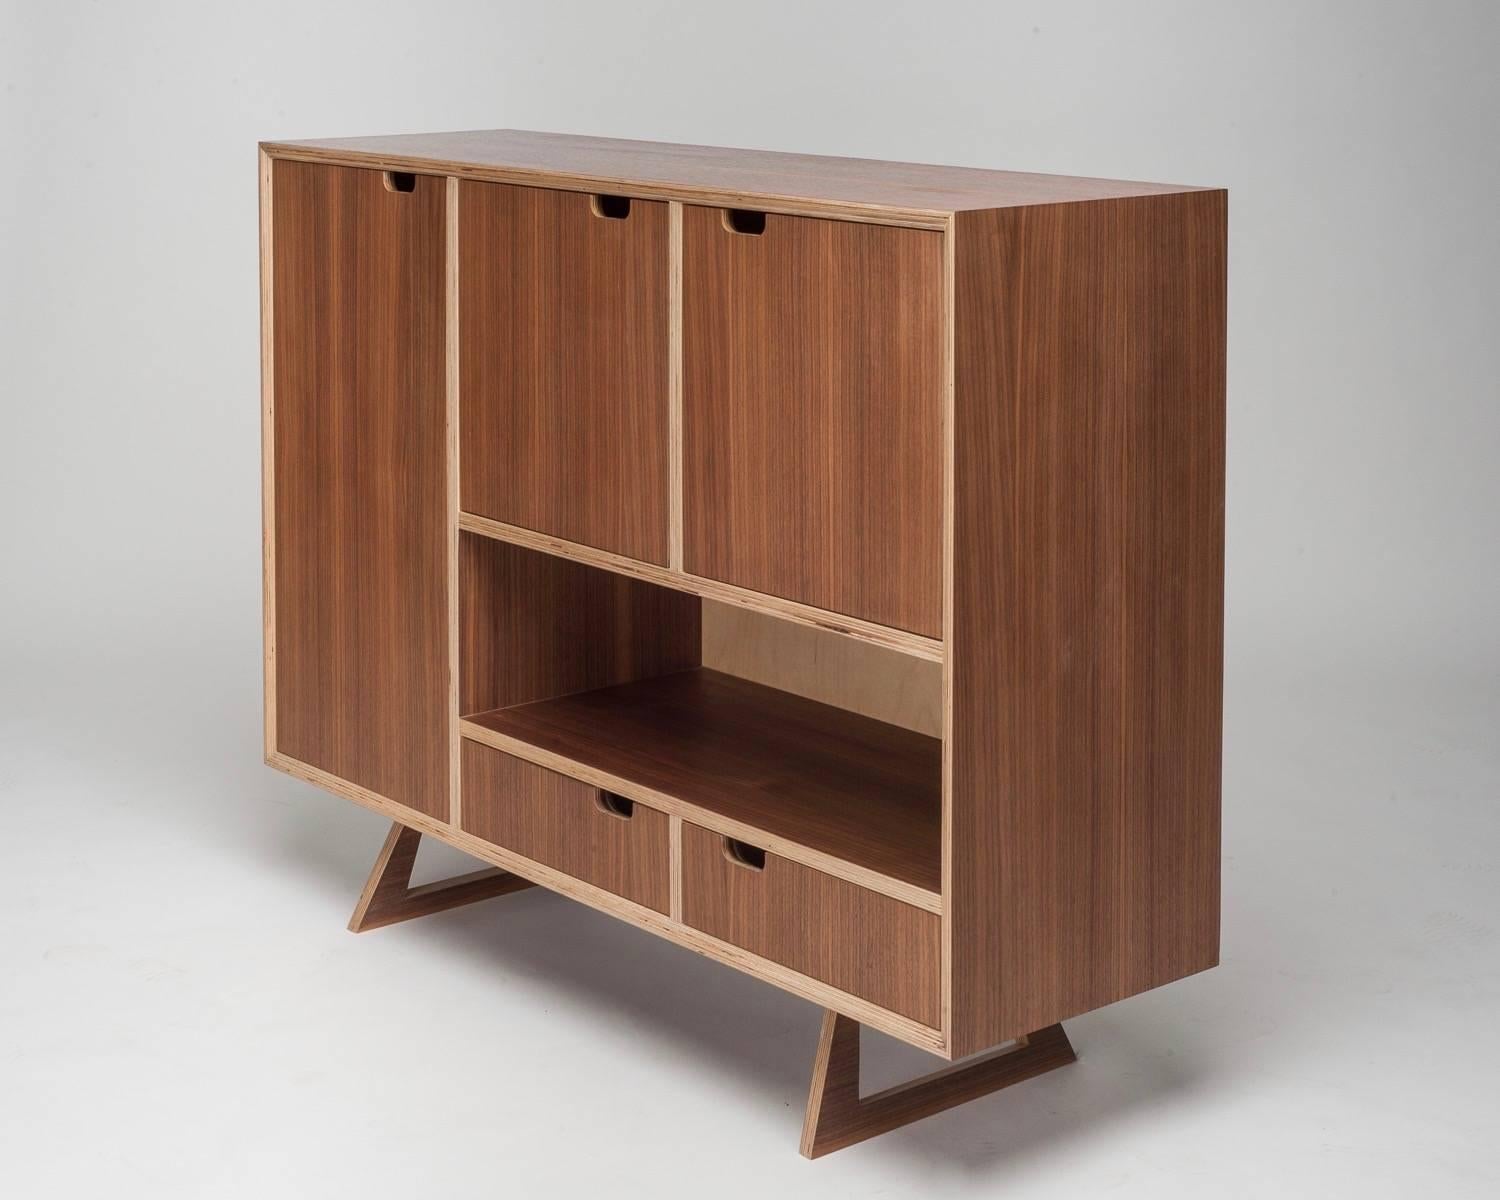 The Bercil sideboard seen here in American walnut. Reduced in price, this piece is a fully functioning prototype showroom piece with very minor wear.